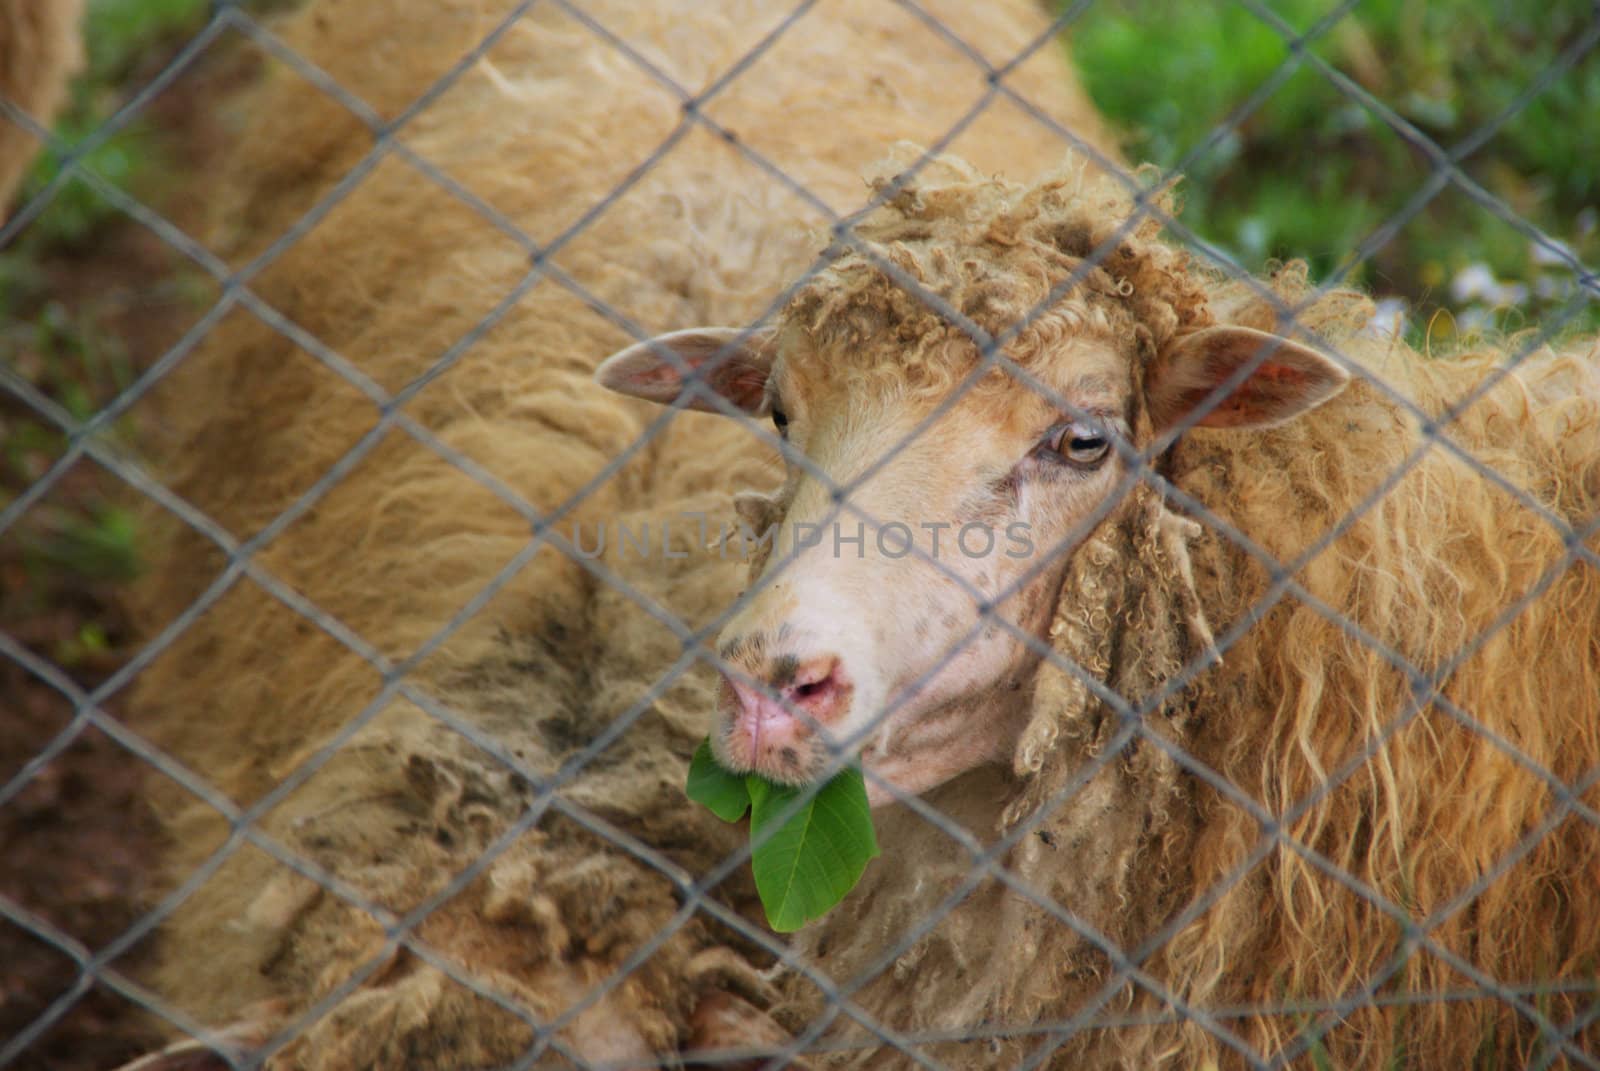 Sheep photographed eating leaves. Behind the fence. In the natural environment.